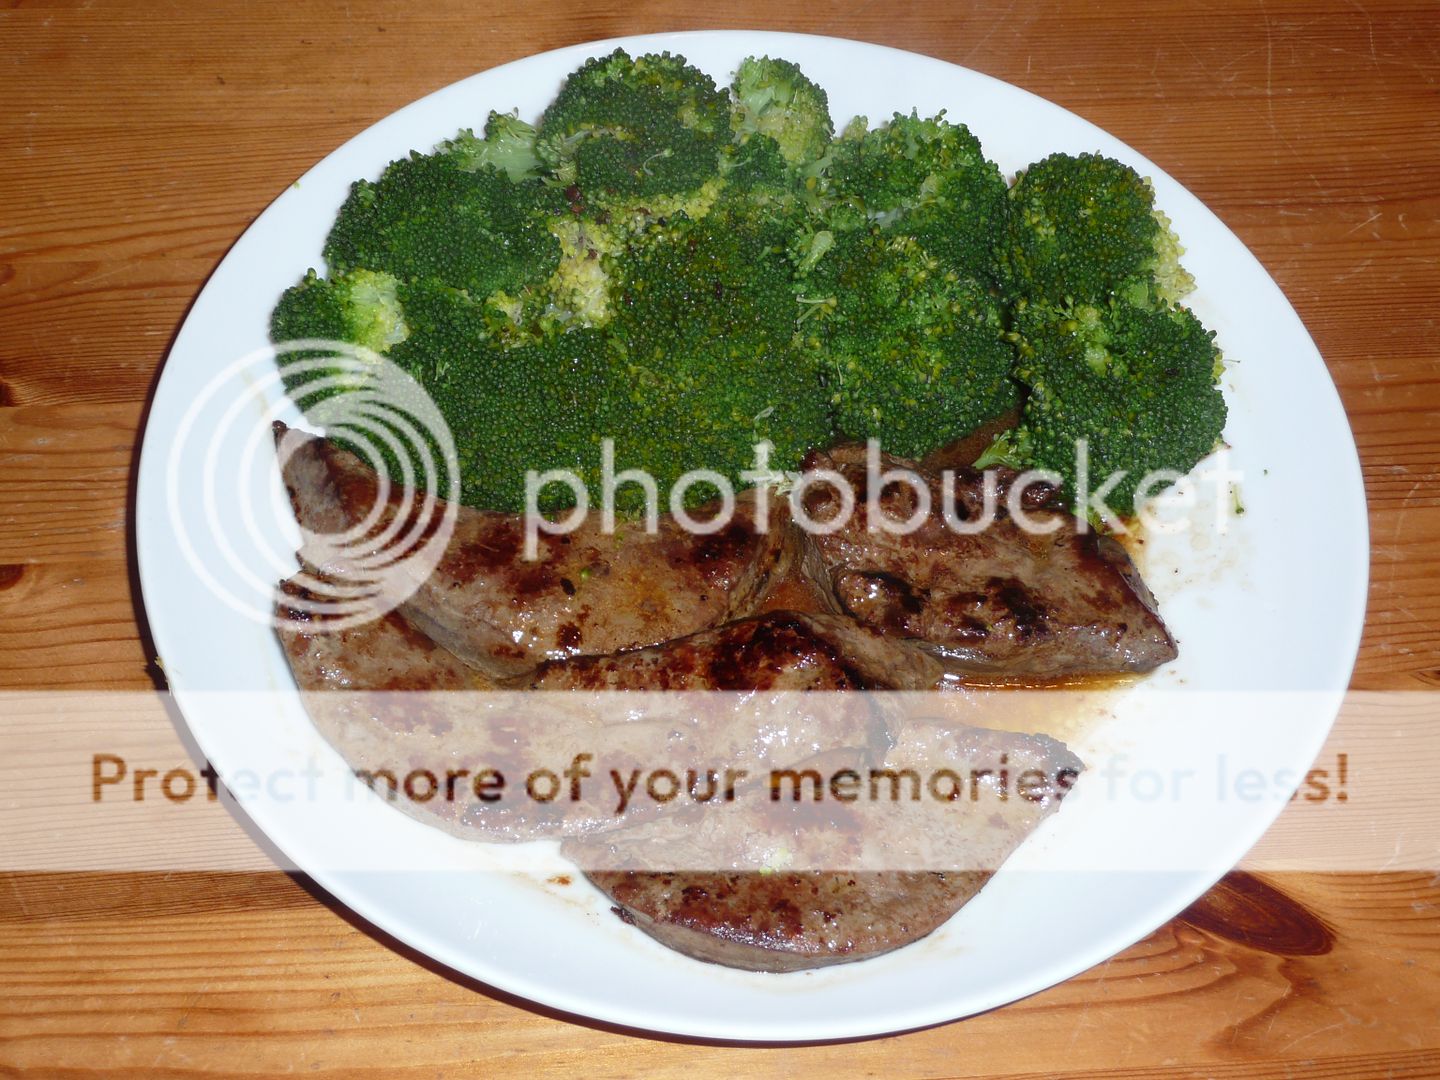 Lamb's liver, pan-fried in lemon and sage butter with steamed broccoli